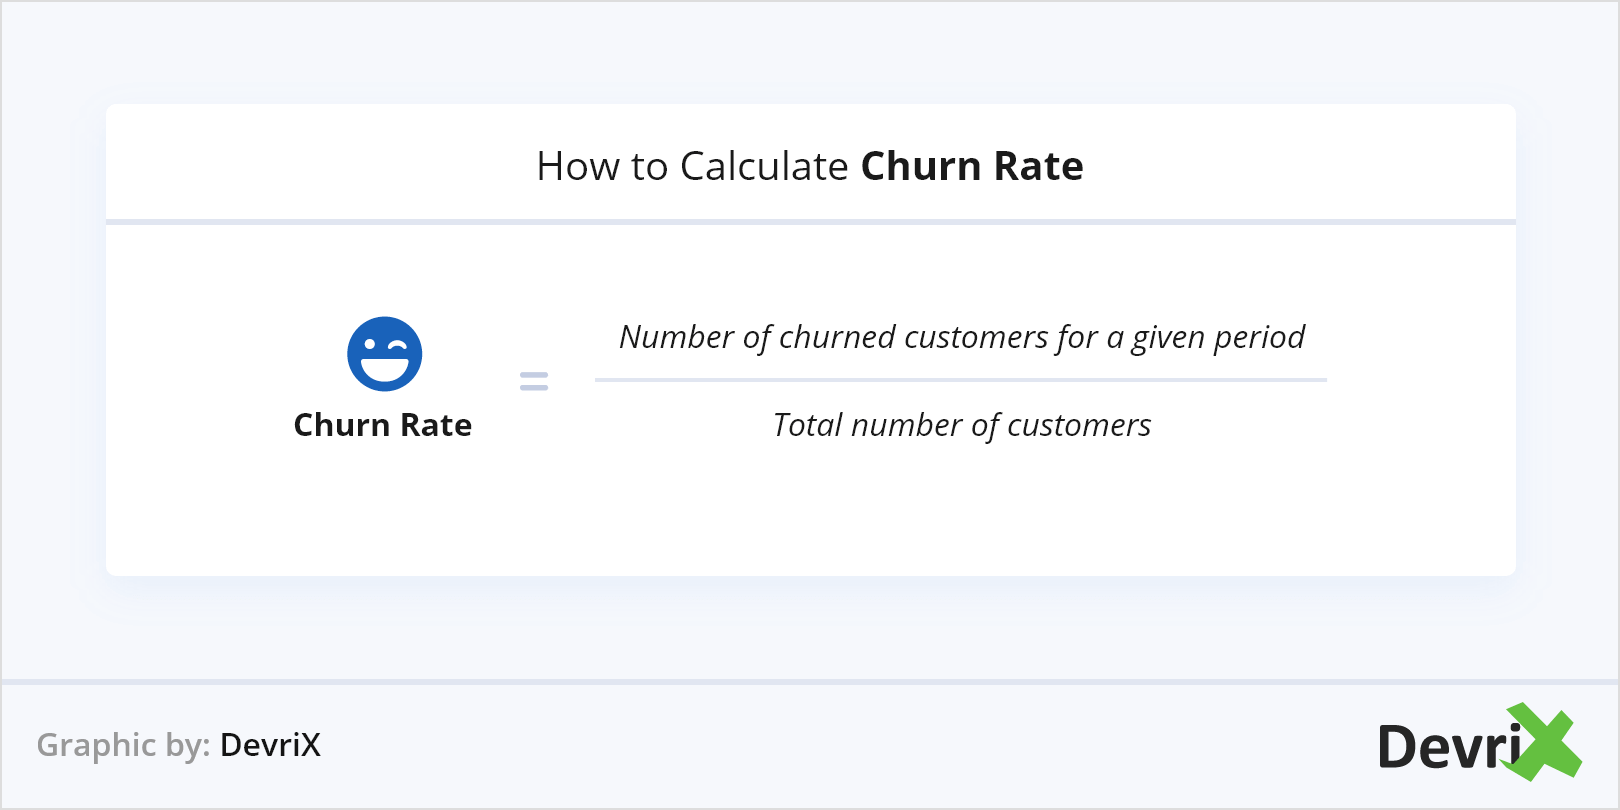 How to Calculate Churn Rate